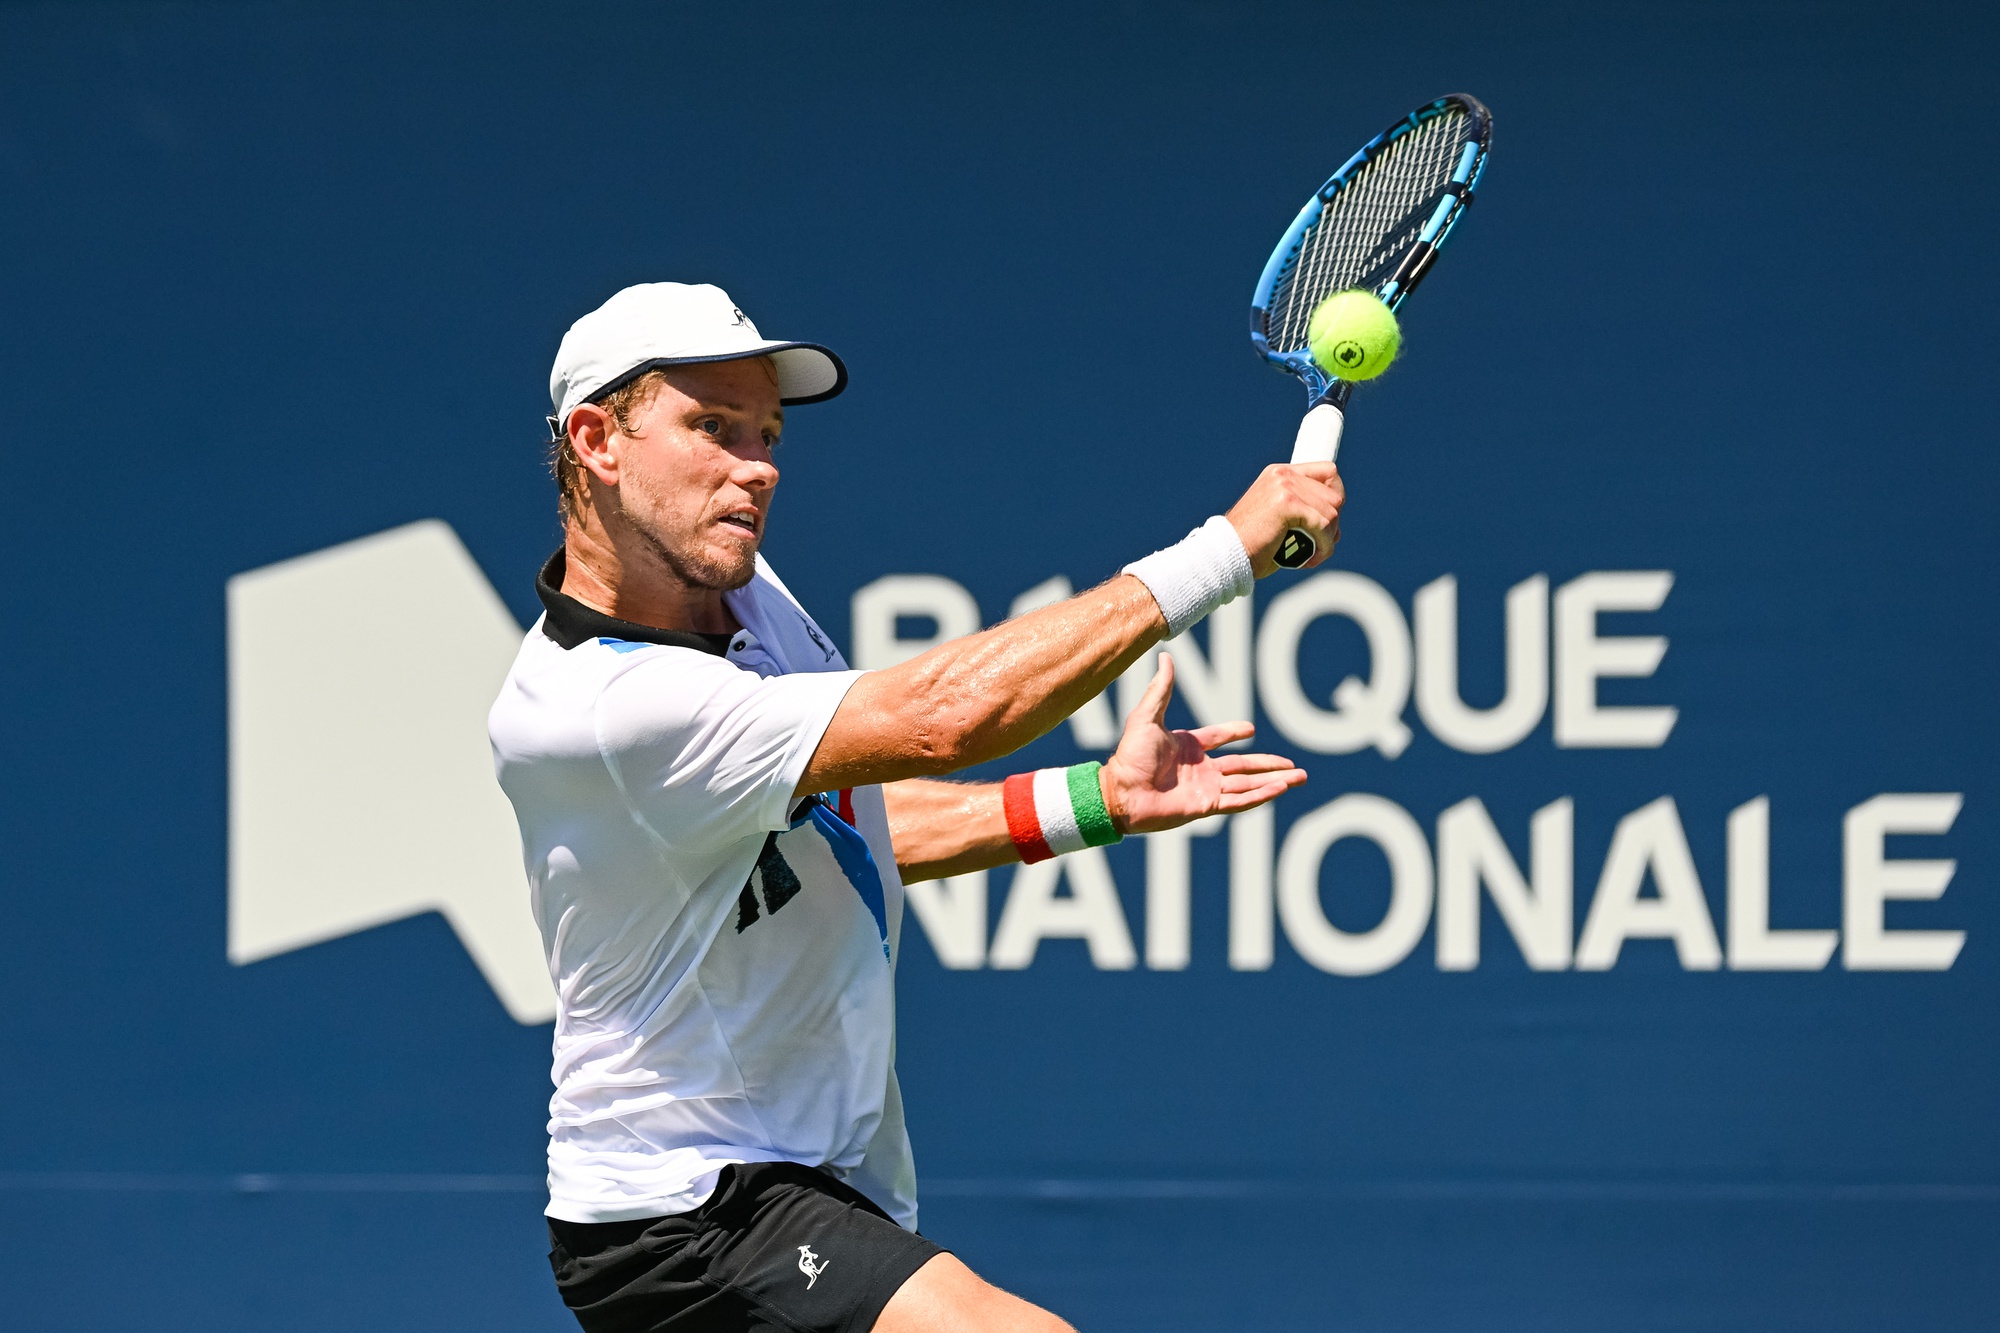 James Duckworth, who won his 13th Challenger title last week, in action.